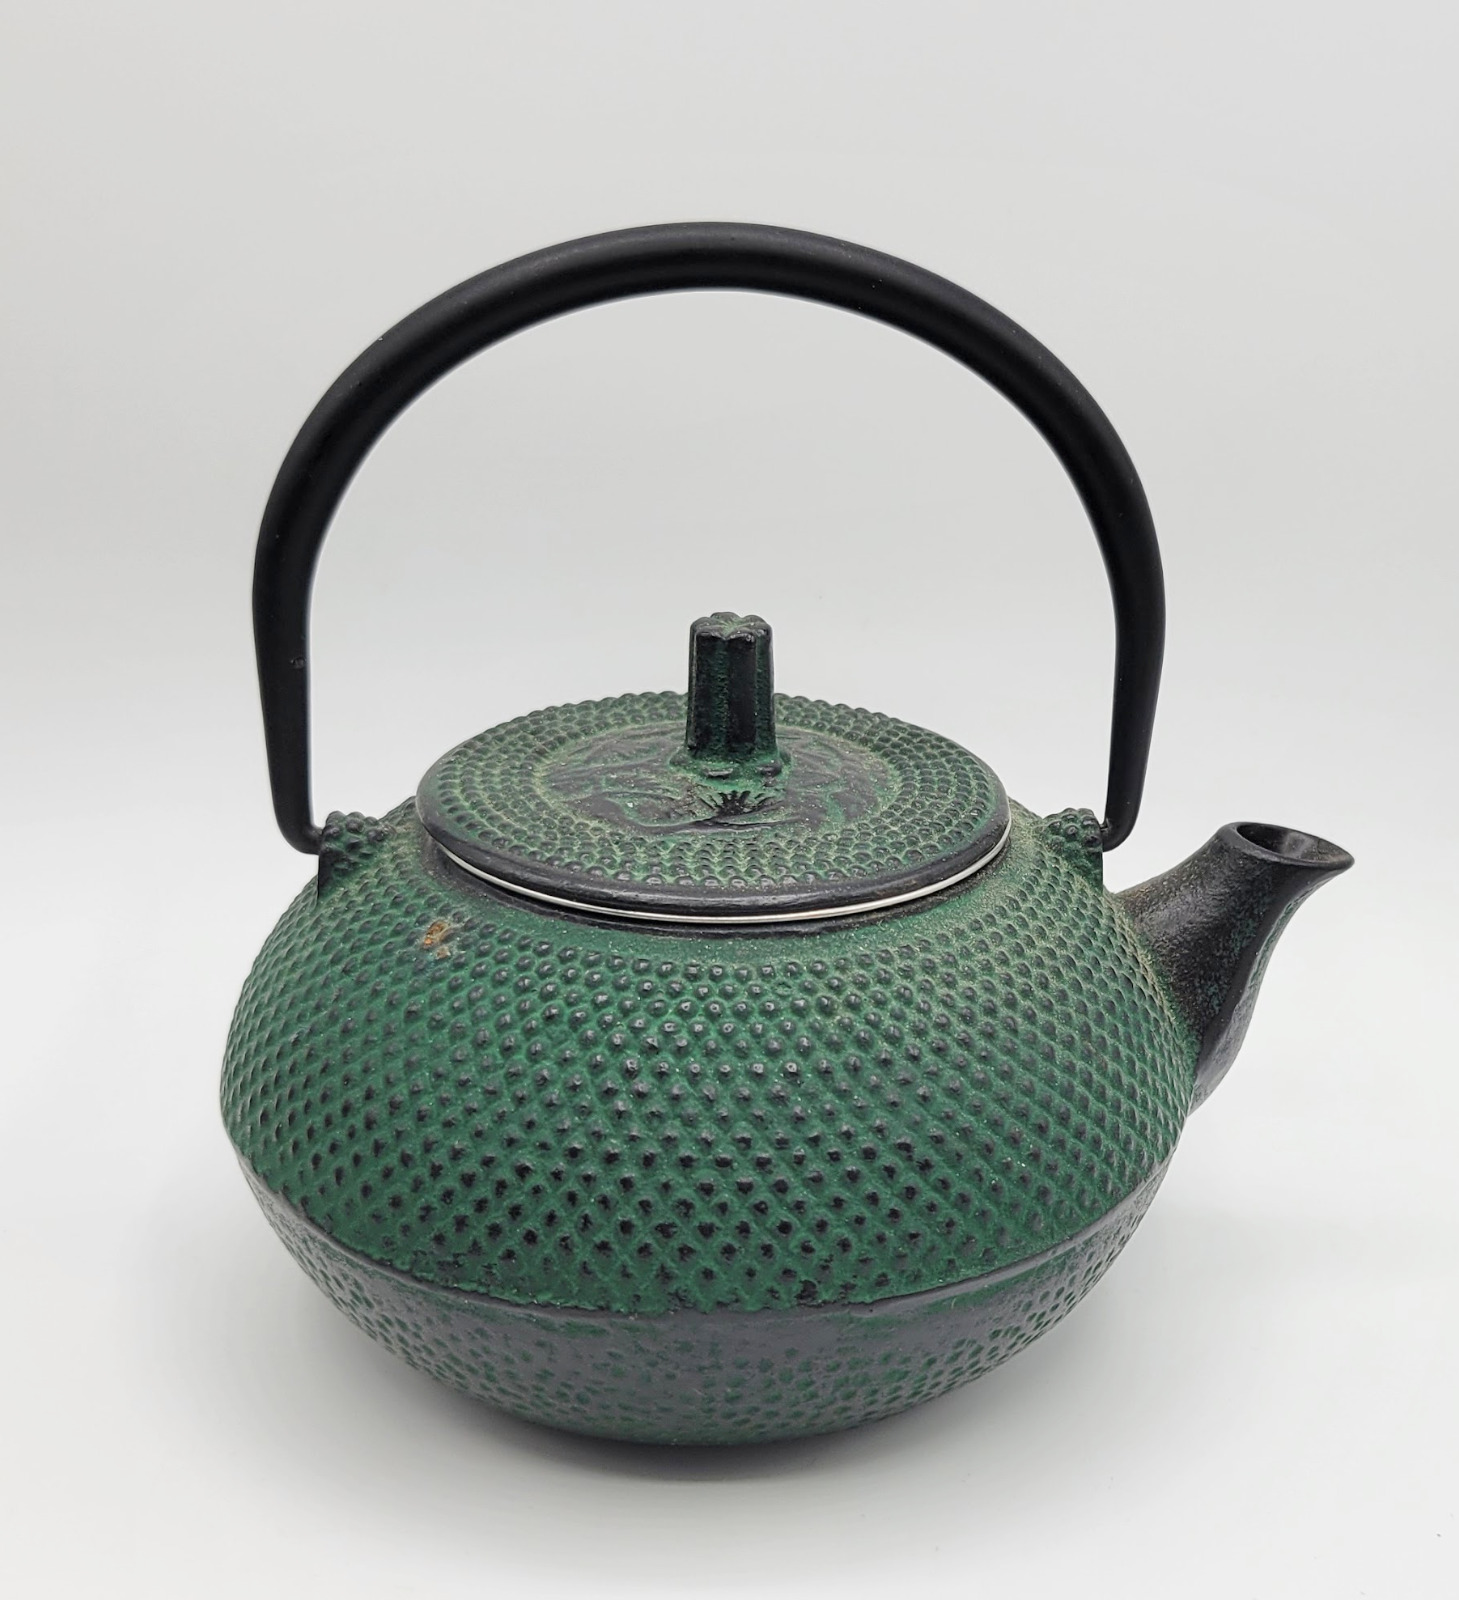 New Kafuh Green Cast Iron Japanese Hobnail Patterned Tea Kettle Pot With Infuser